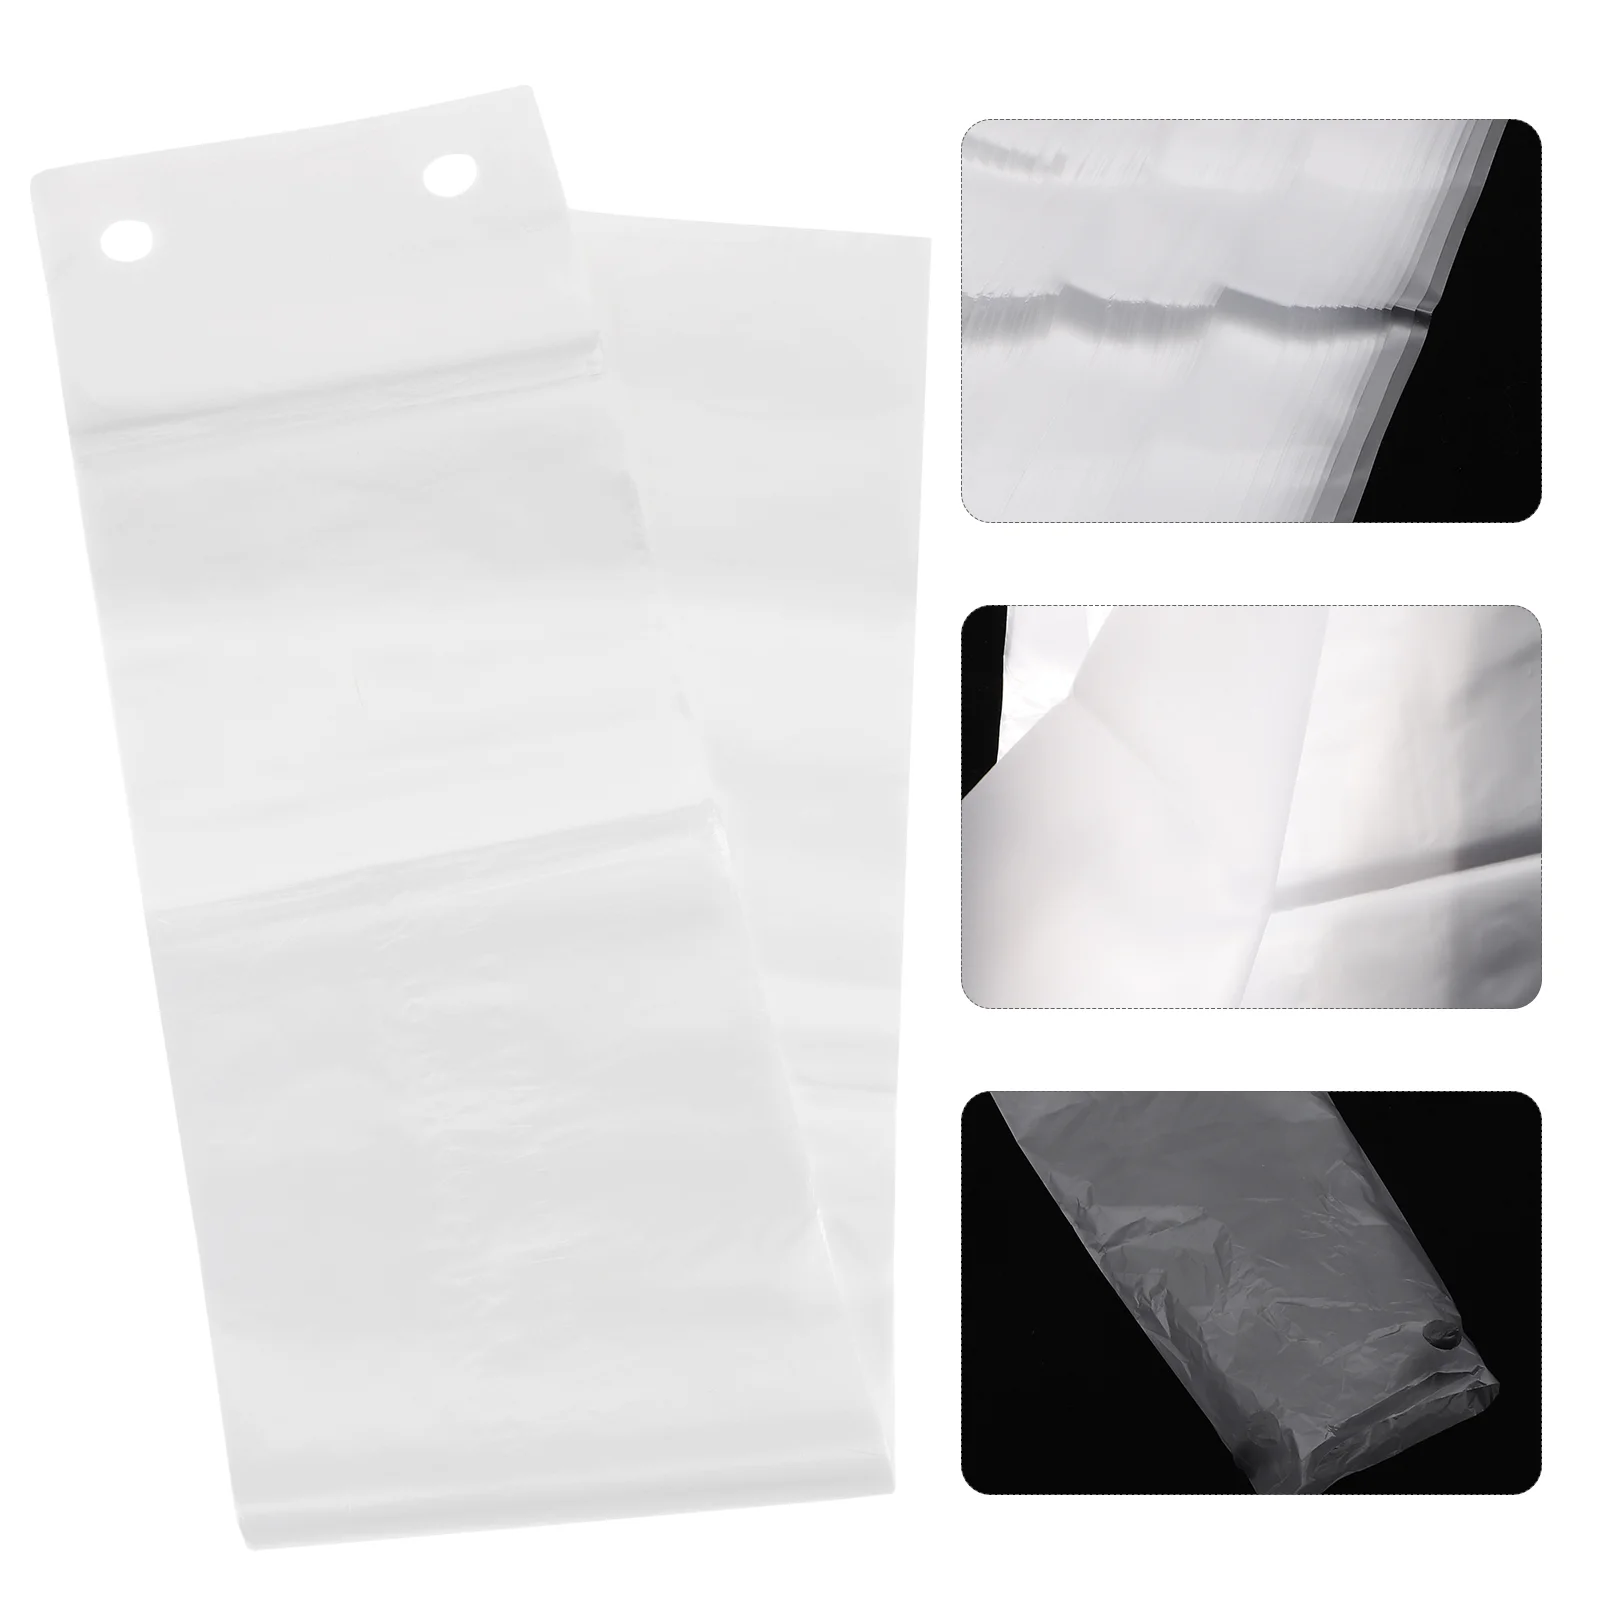 

100pcs 13x72cm Clear Wet Bags Replacement Long Bag Refills Accidents and Slips for Rainy Day Office Home